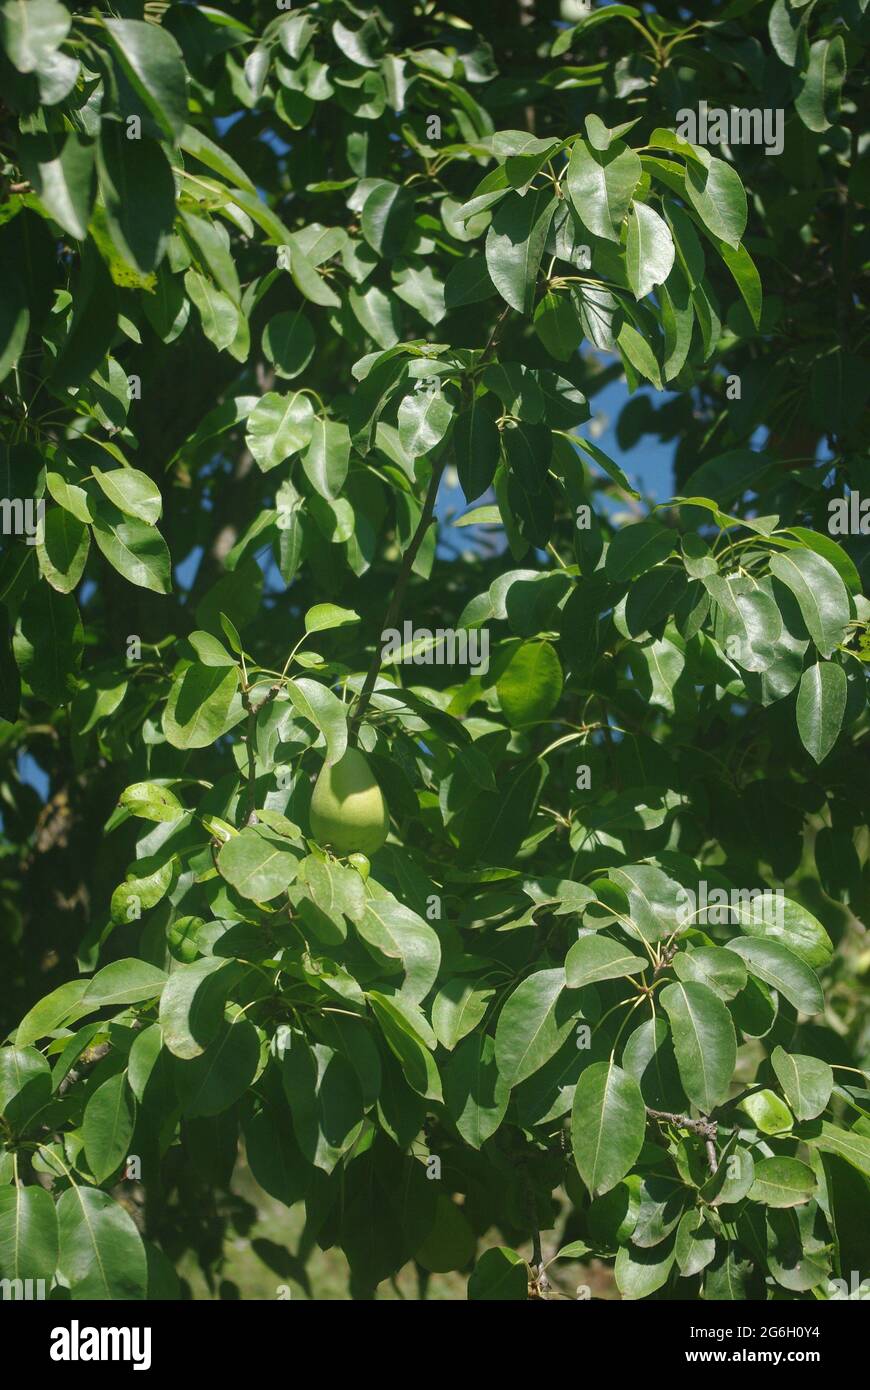 Pyrus nivalis, commonly known as Yellow pear tree Stock Photo